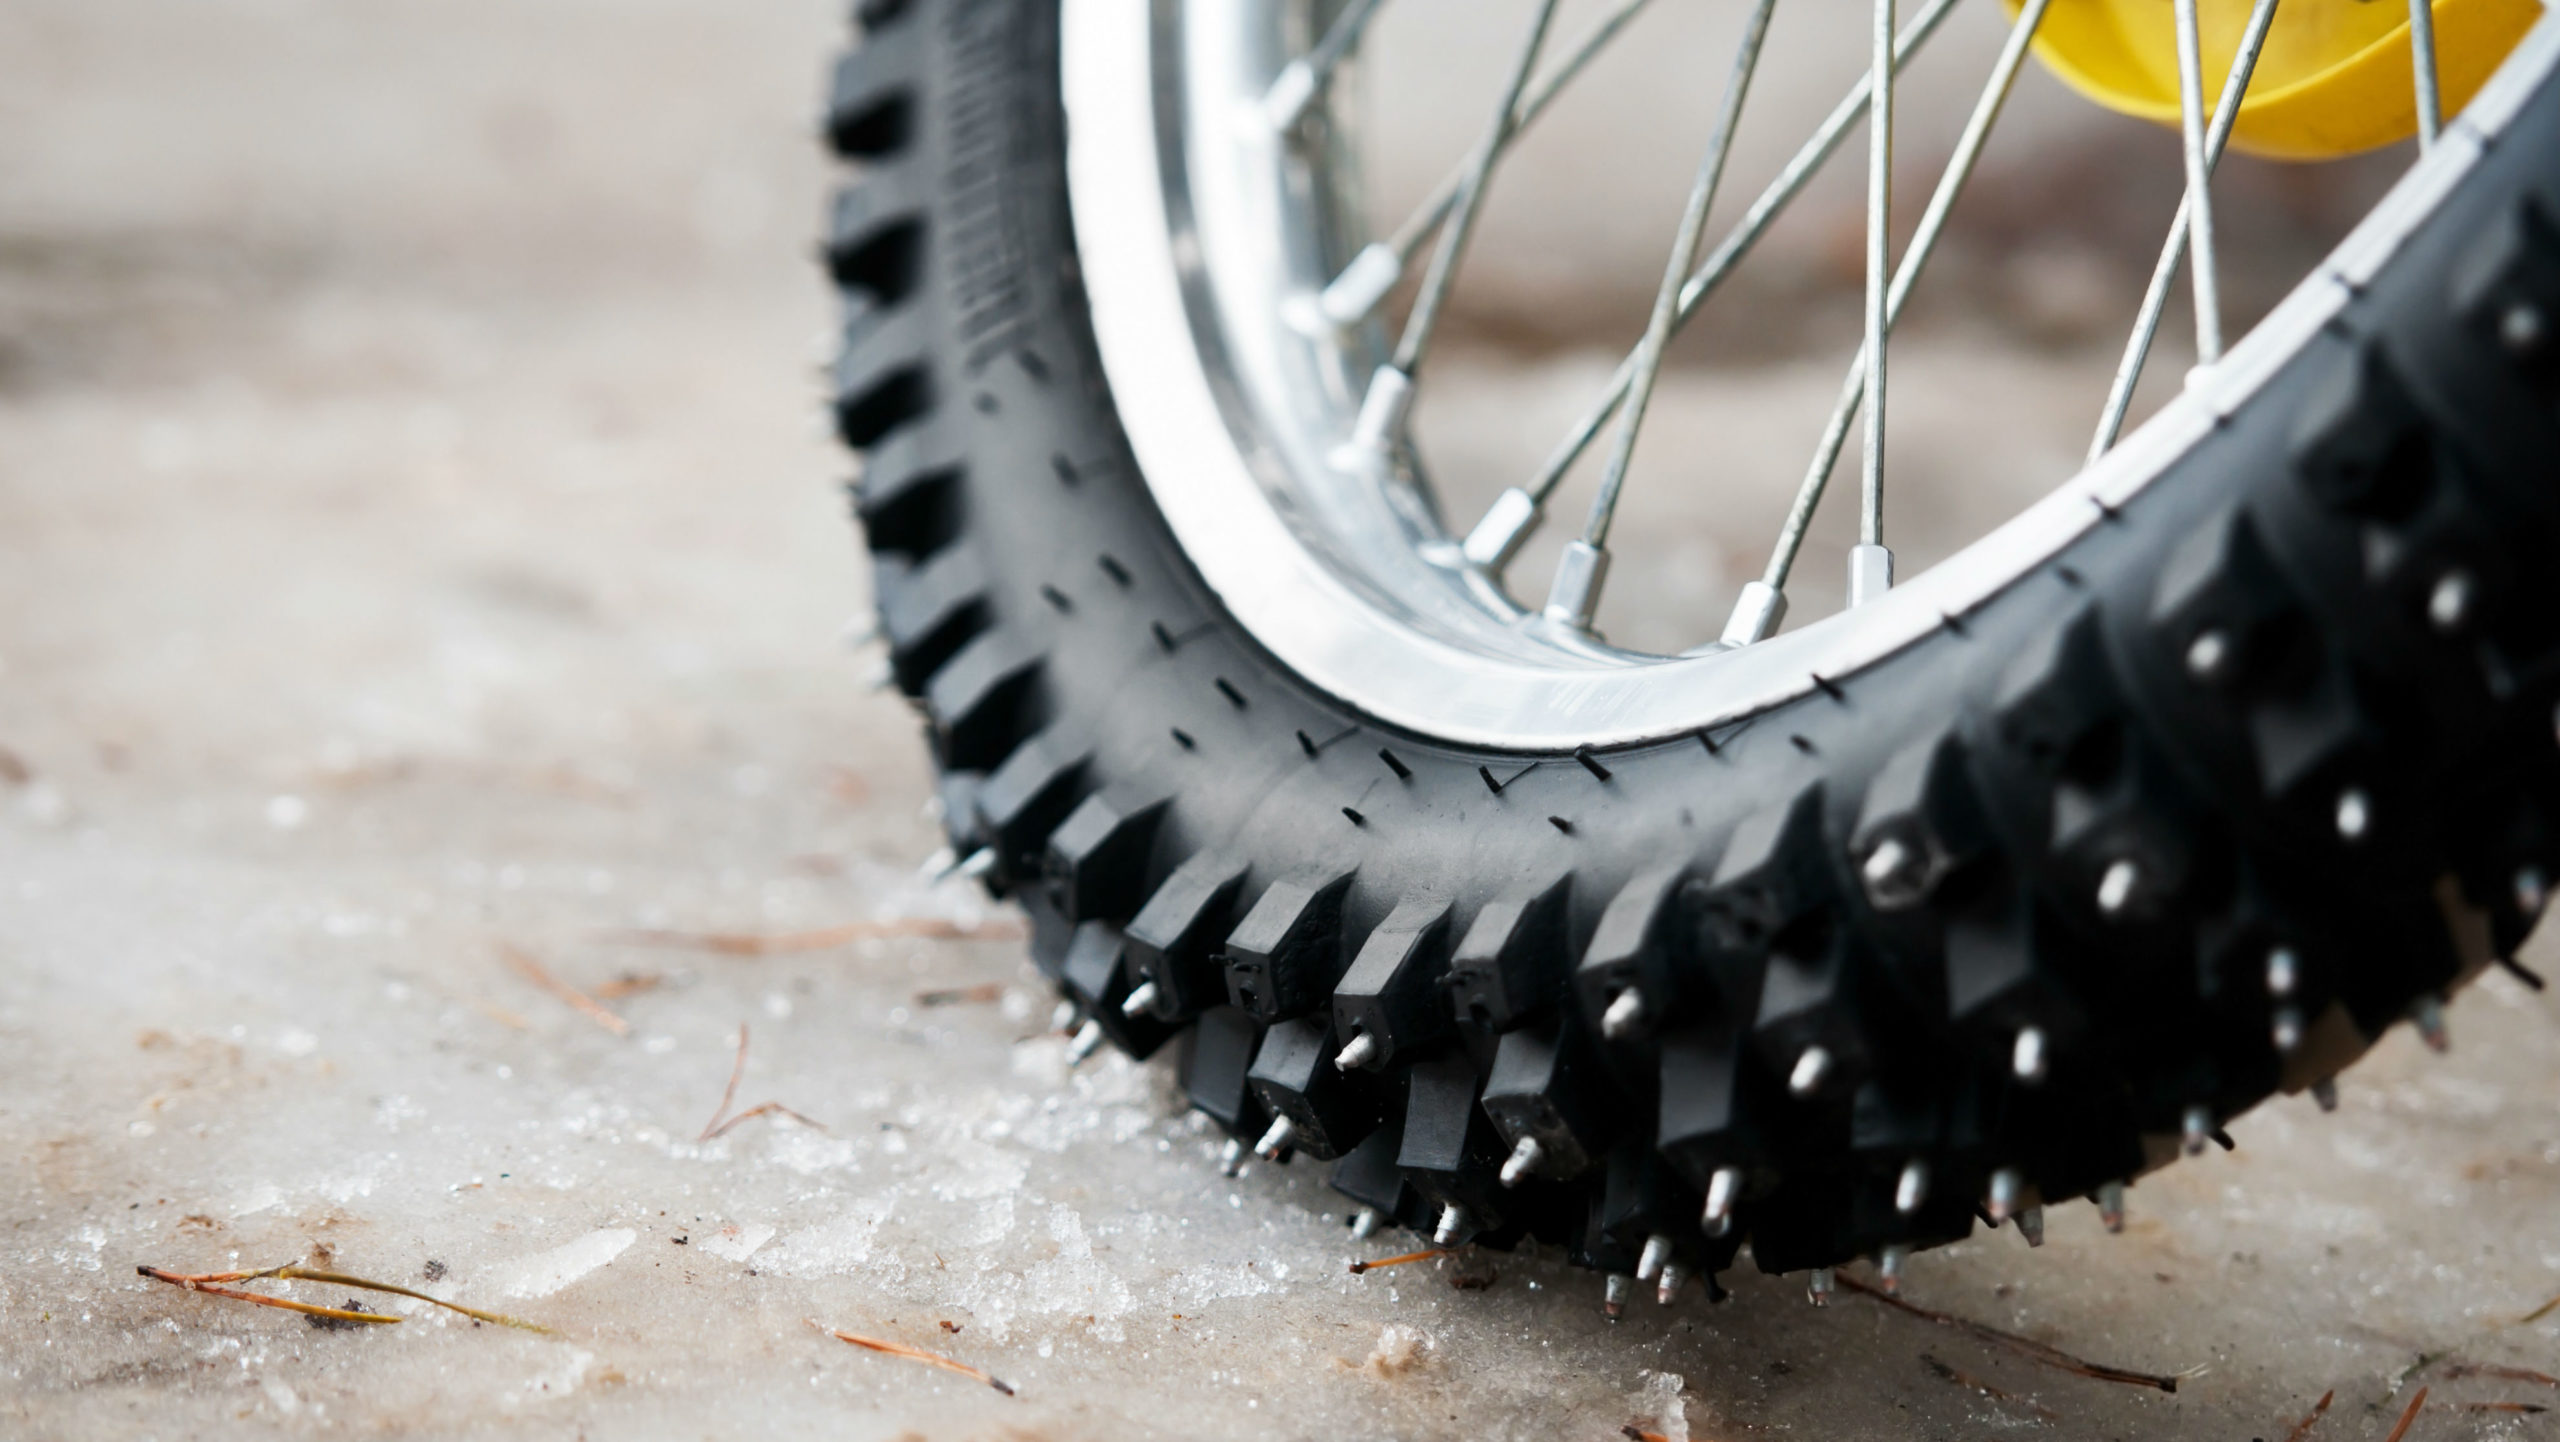 Four Ways To Prepare Your Bicycle For Winter